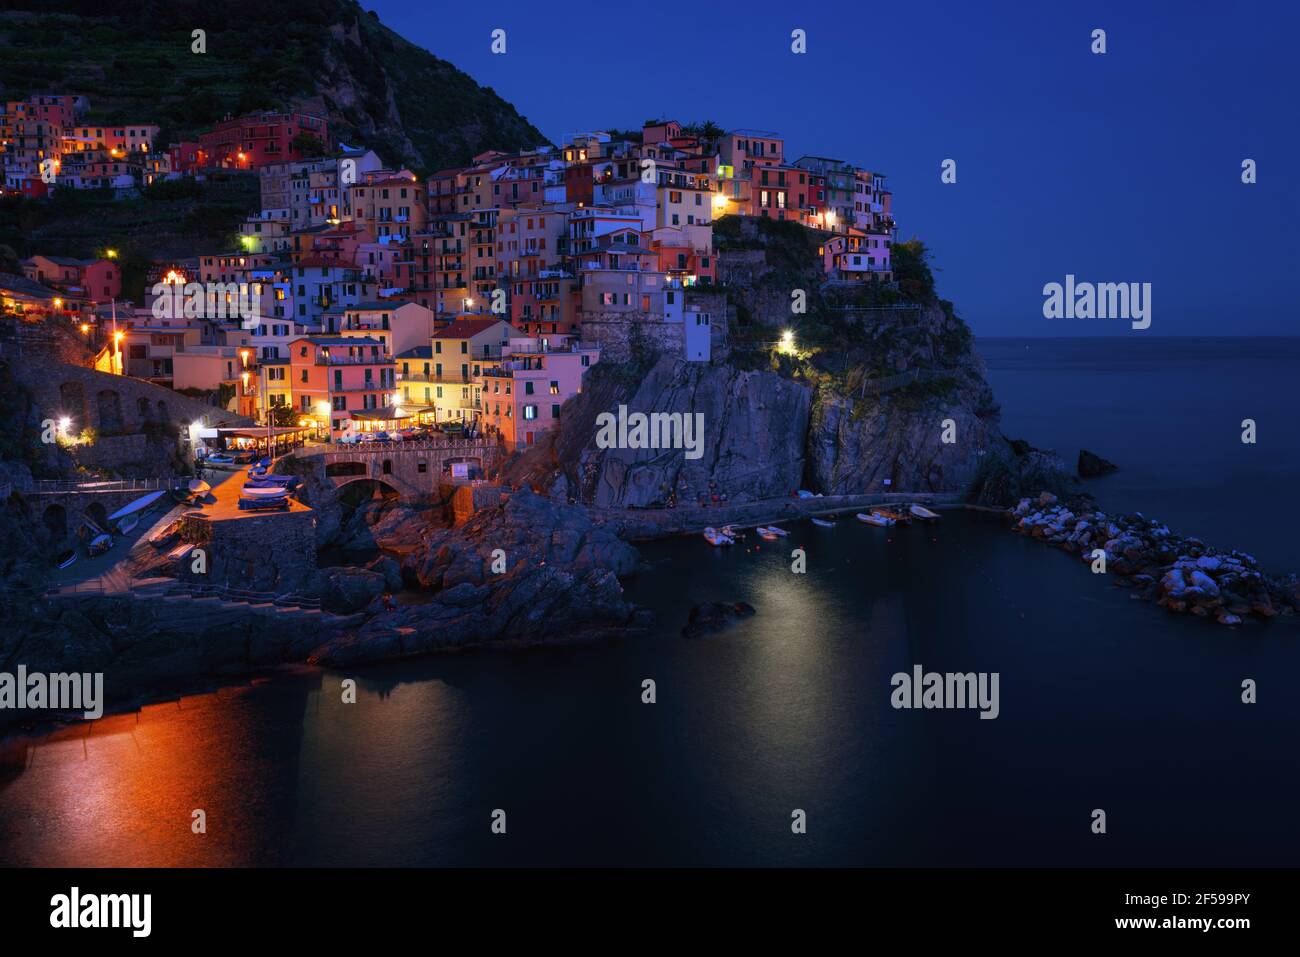 Magnificent night view of the Manarola village. Manarola is one of the five famous villages in Cinque Terre Five lands National Park. Liguria, Italy Stock Photo